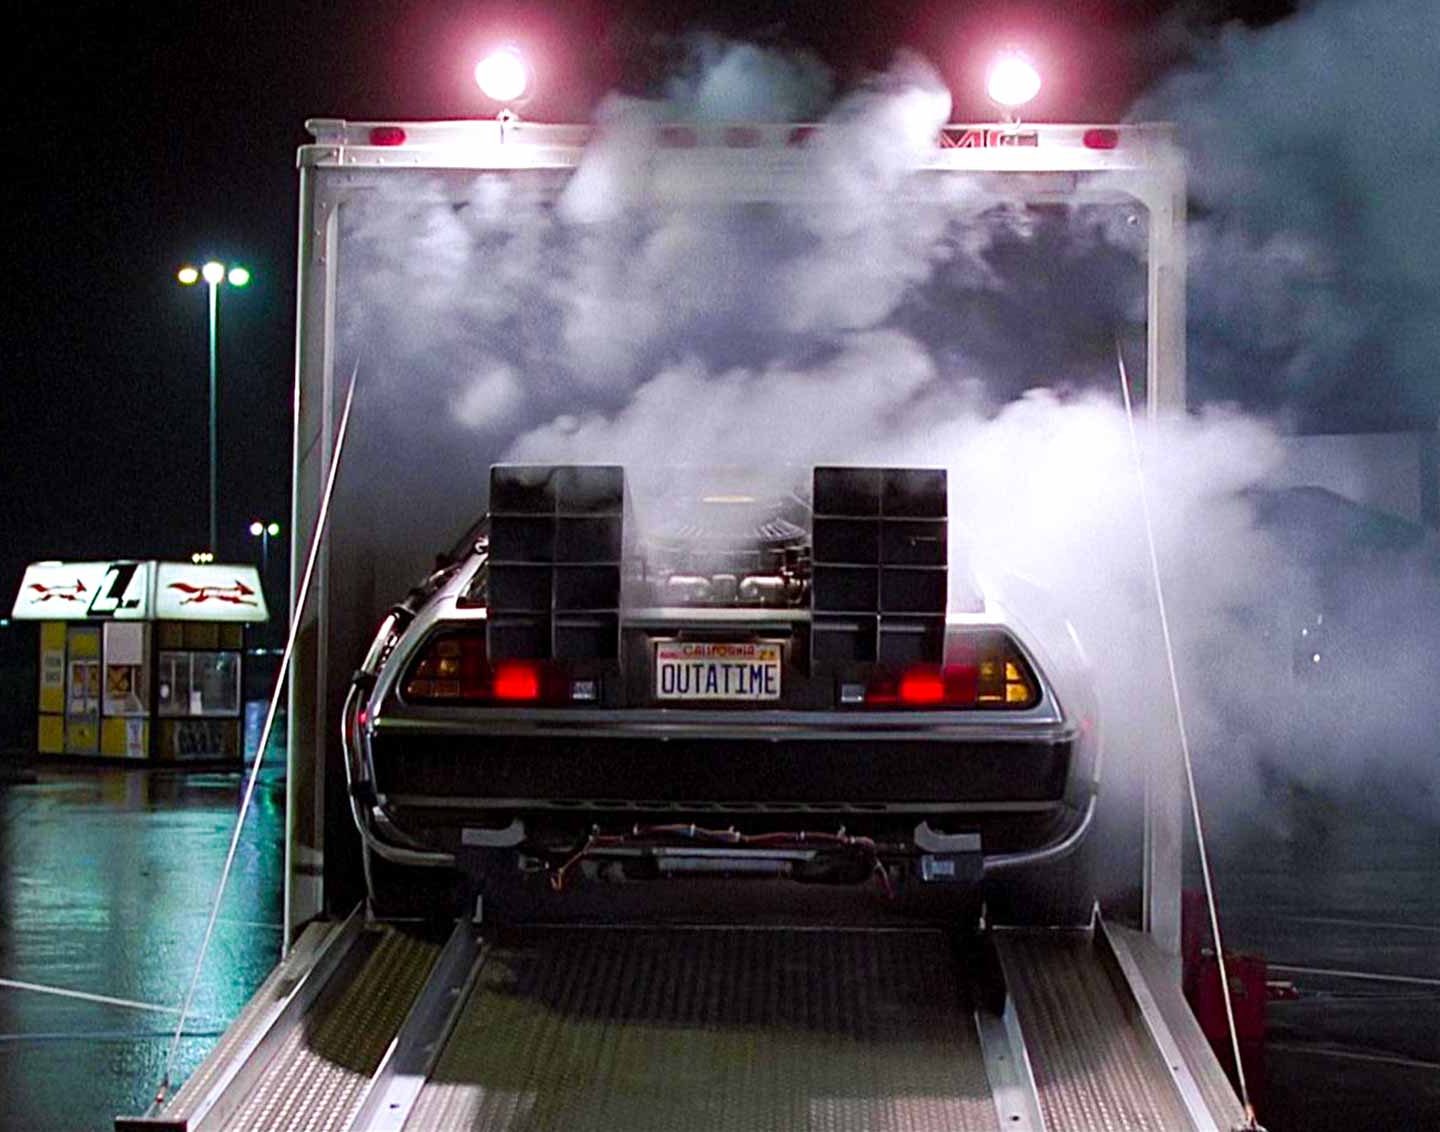 Quora: “Would anyone even know about DeLorean cars if it wasn’t for the movie Back to the Future?”